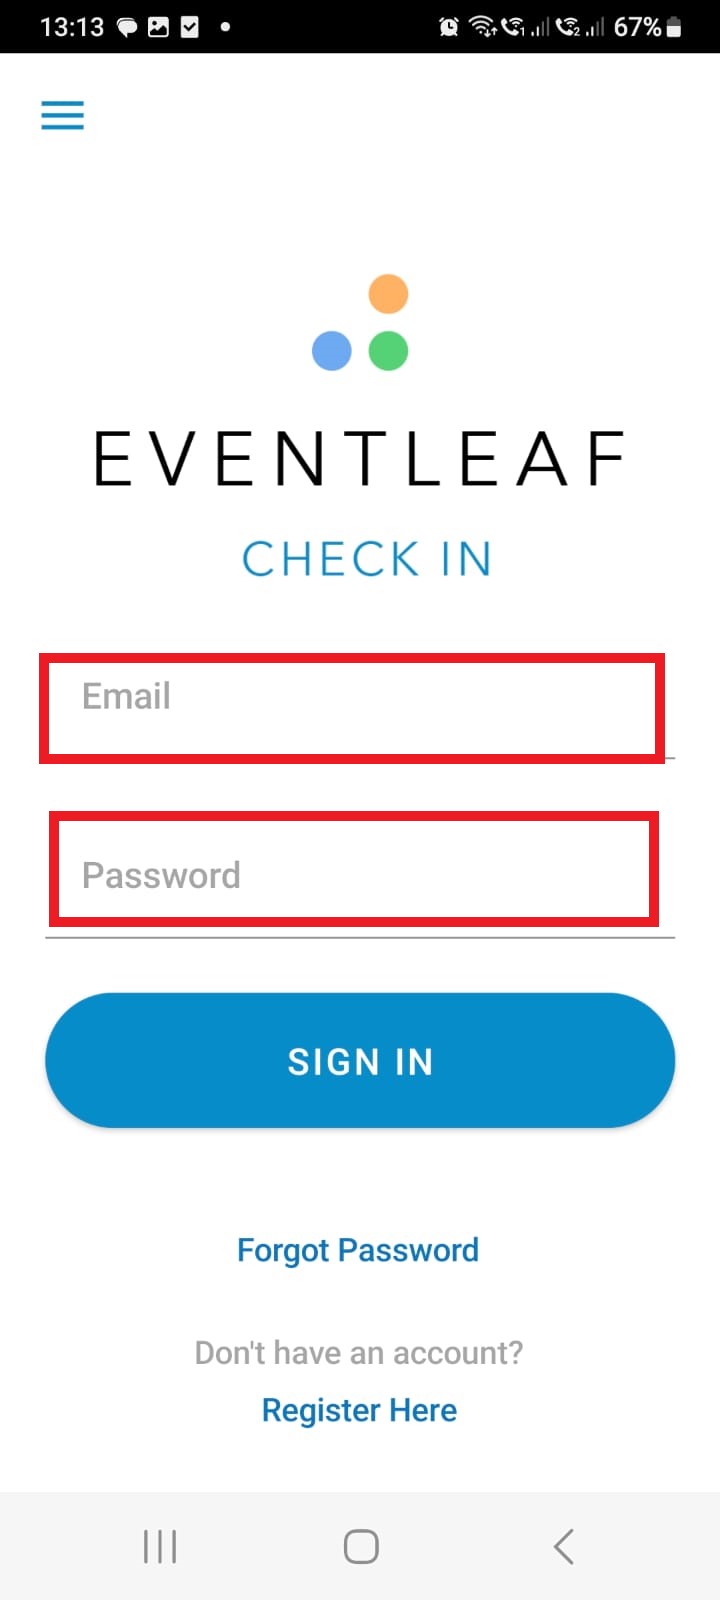 Launch the app and log in with your Eventleaf credentials